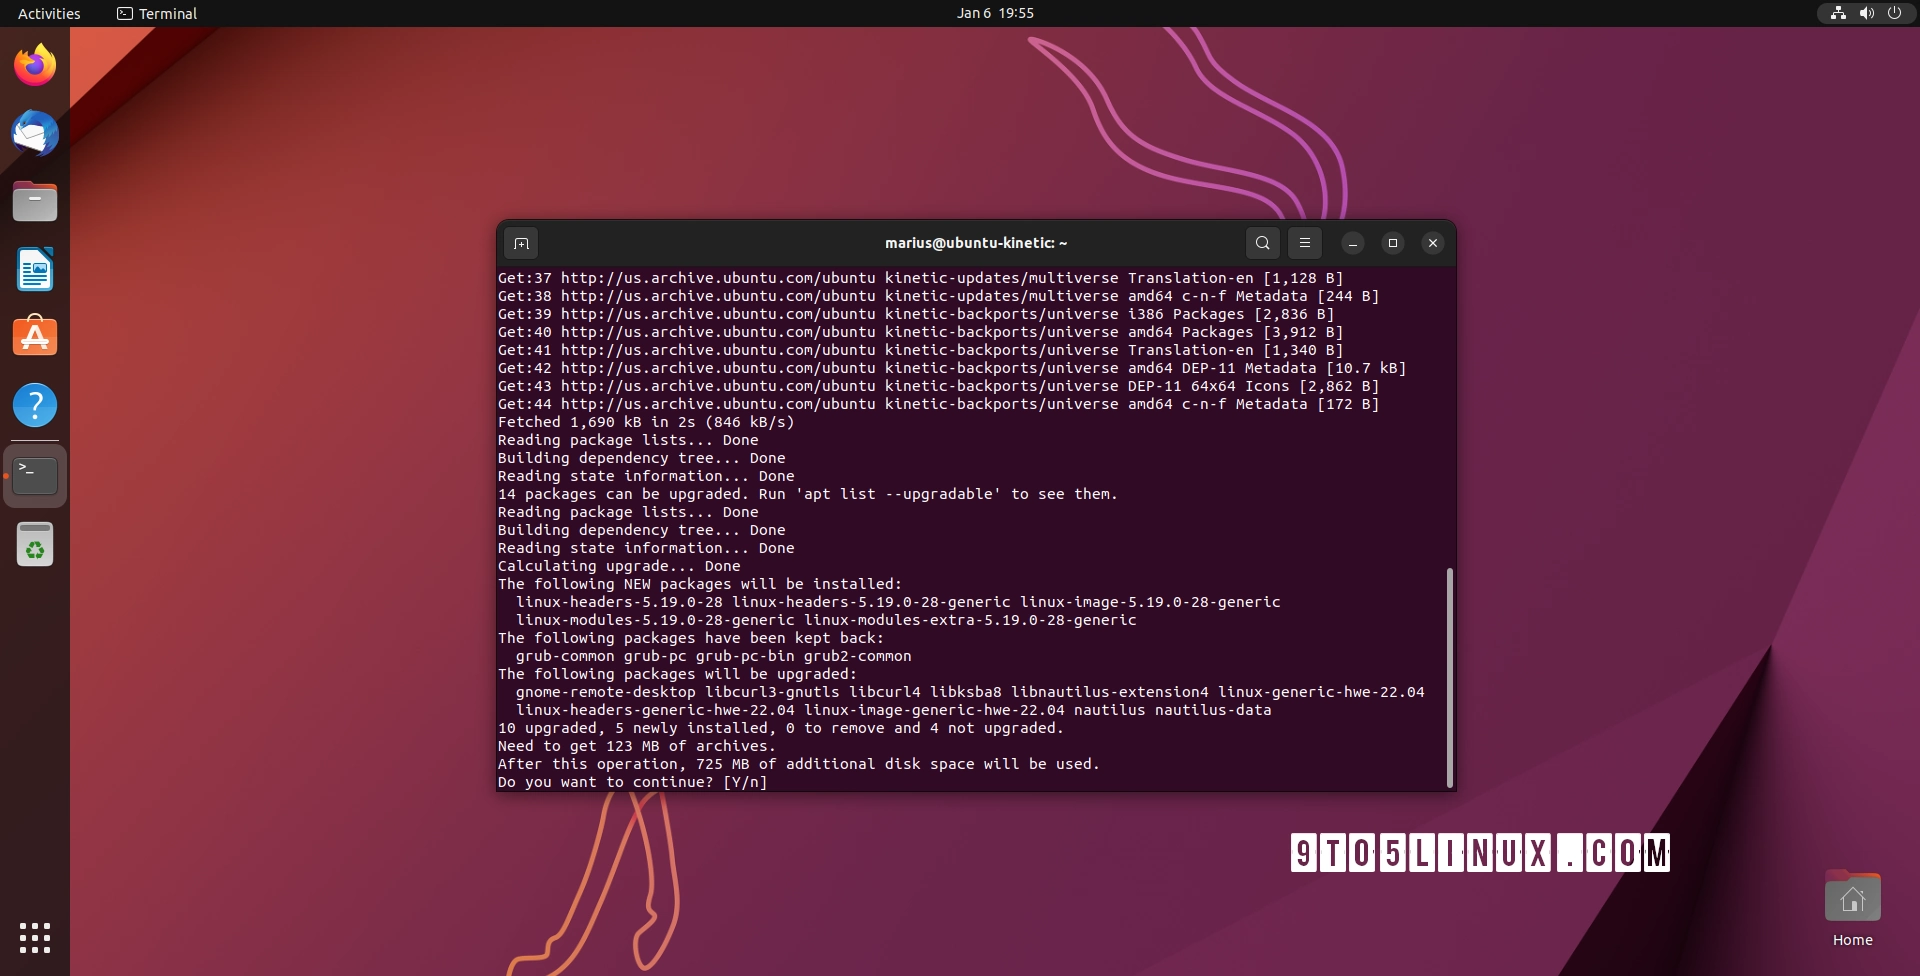 Ubuntu Users Get Massive Kernel Security Updates, More Than 20 Vulnerabilities Patched